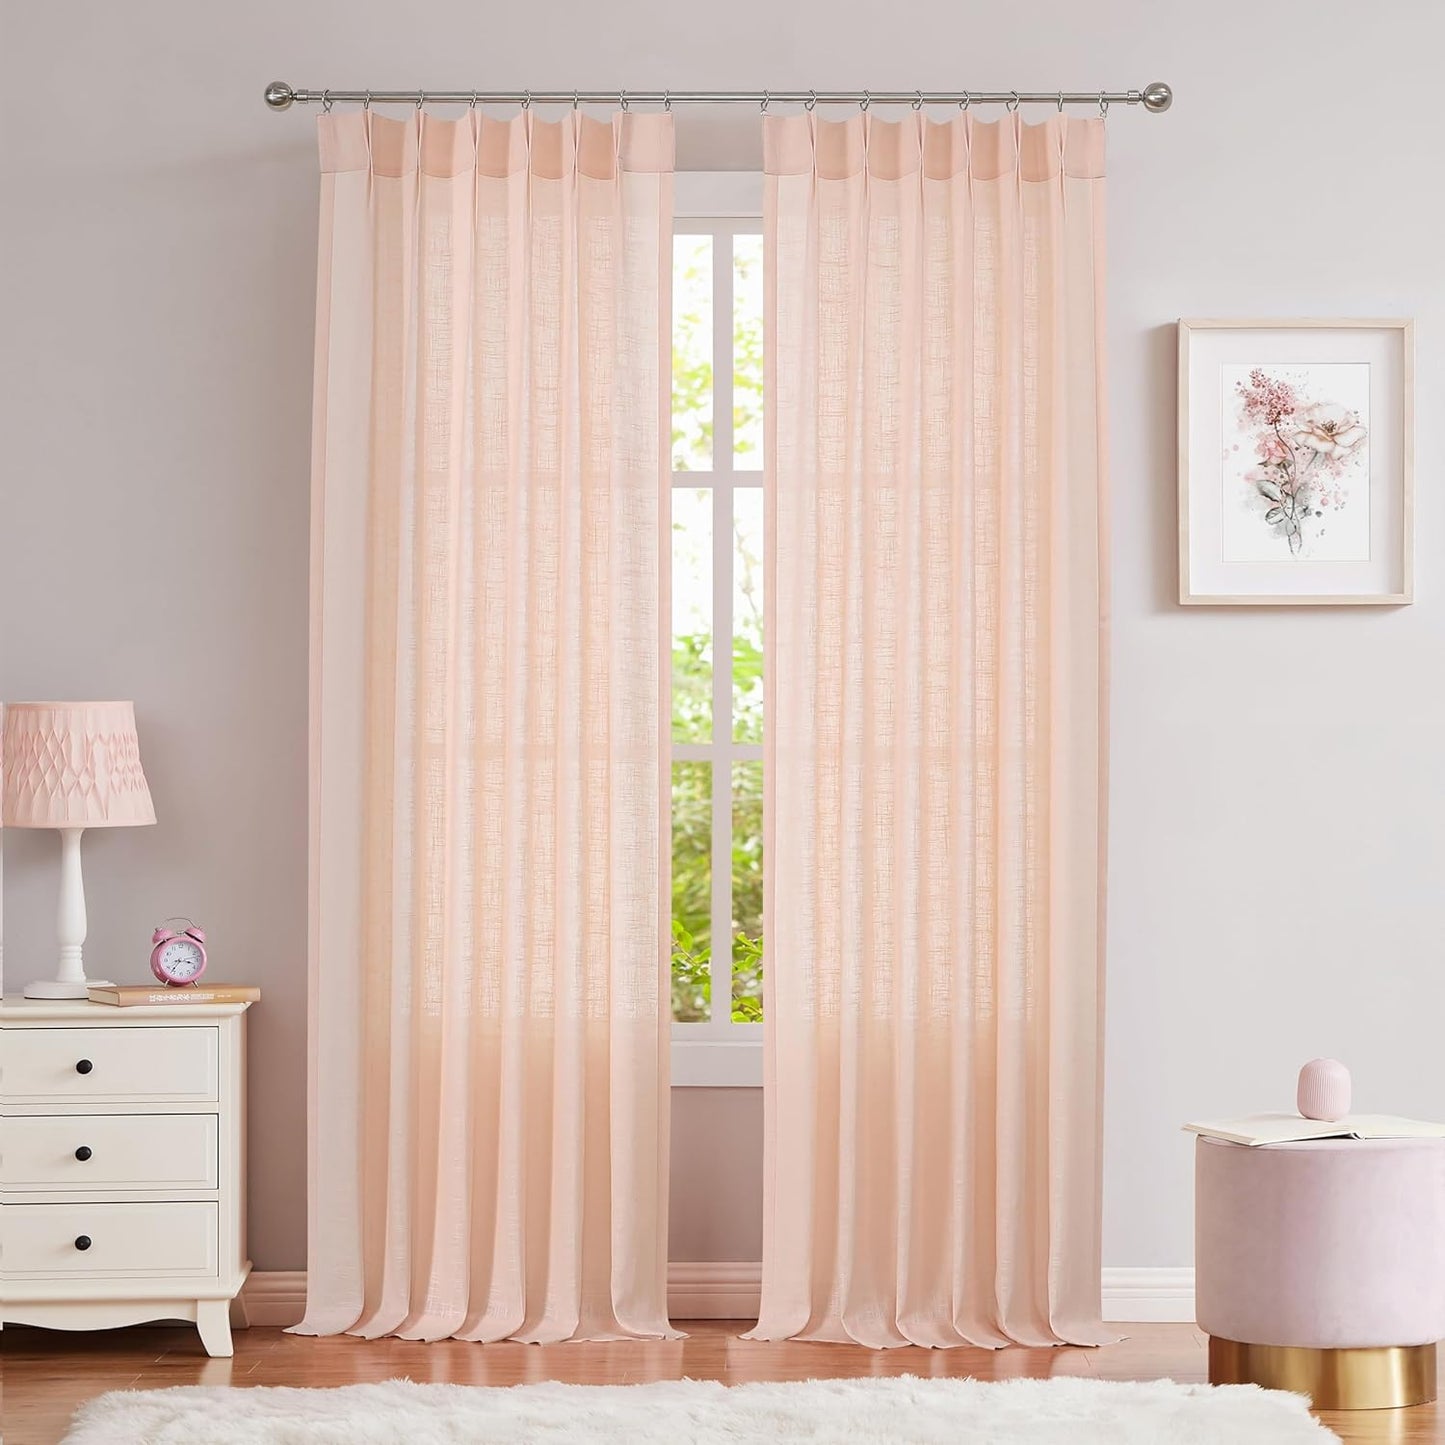 White Pinch Pleated Curtain Semi Sheer Curtain Panel Linen Cotton Blend Decorative Drape 84 Inches Long for Living Room Bedroom Farmhouse Rustic Window Treatment, White, 34"X84"X2  Central Park Coral Pink 34"X84"X2 